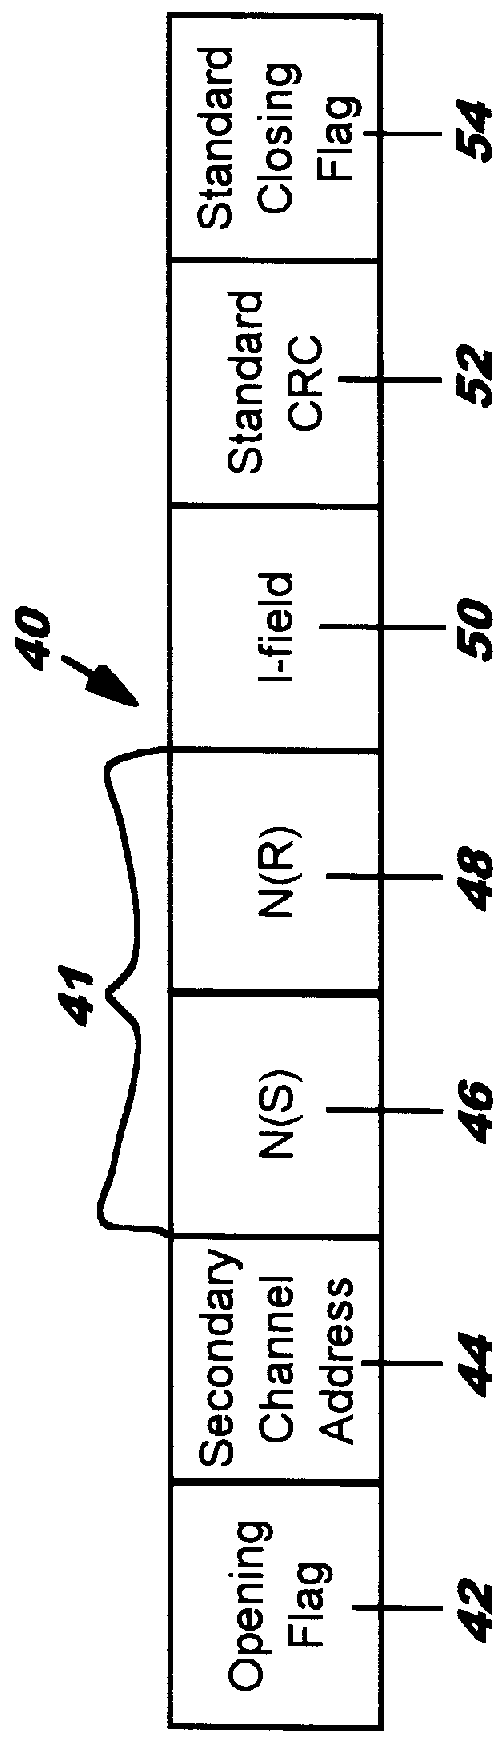 Method and system in a data communications system for the retransmission of only an incorrectly transmitted portion of a data packet